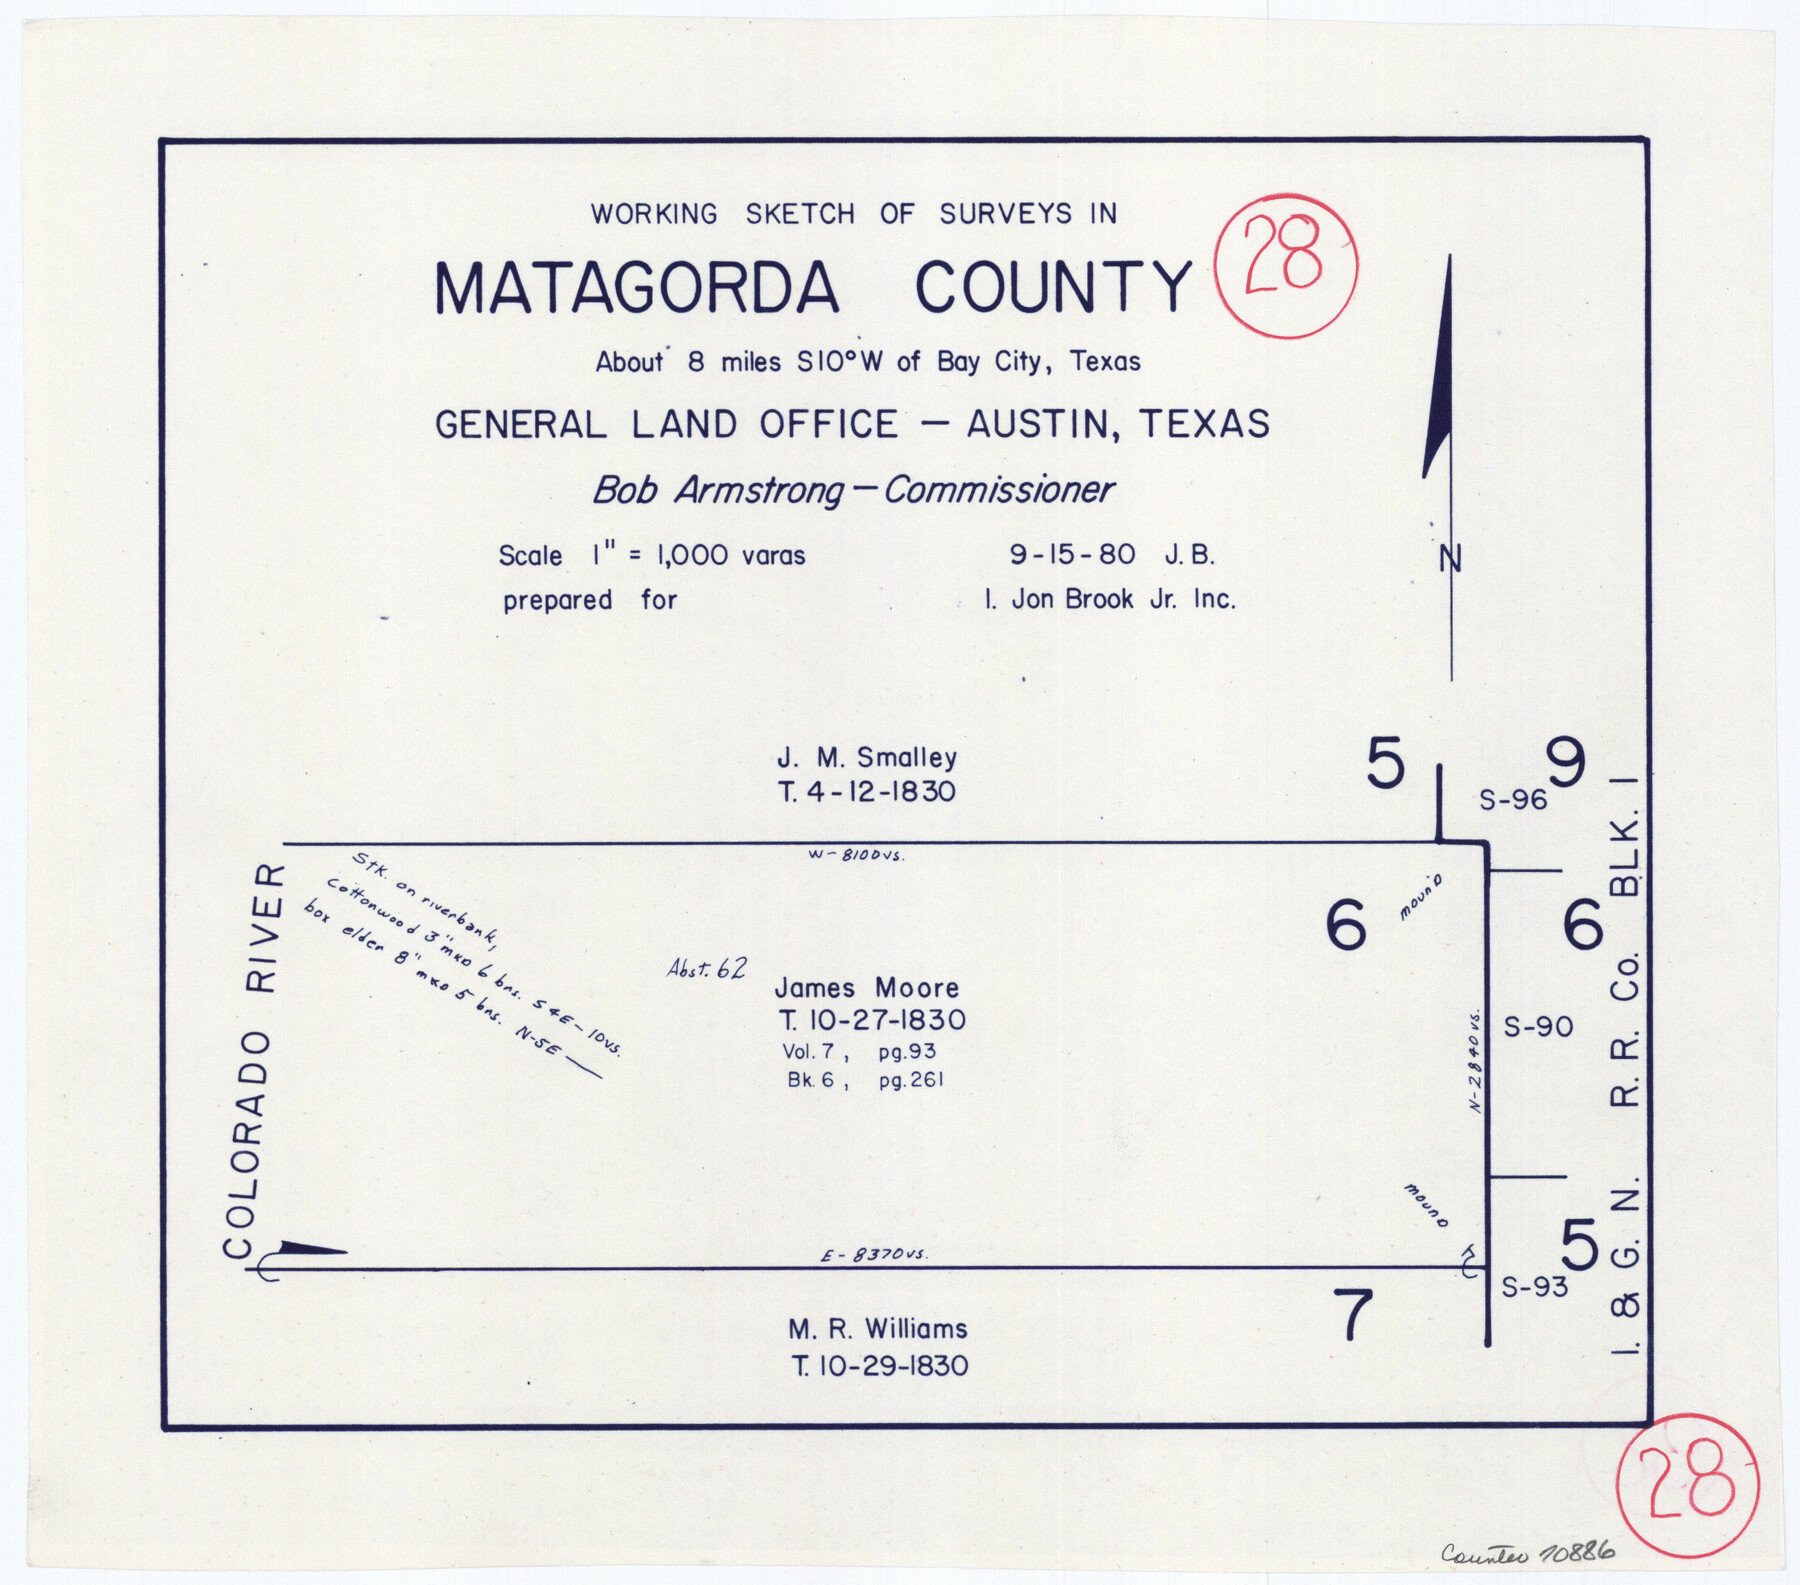 70886, Matagorda County Working Sketch 28, General Map Collection